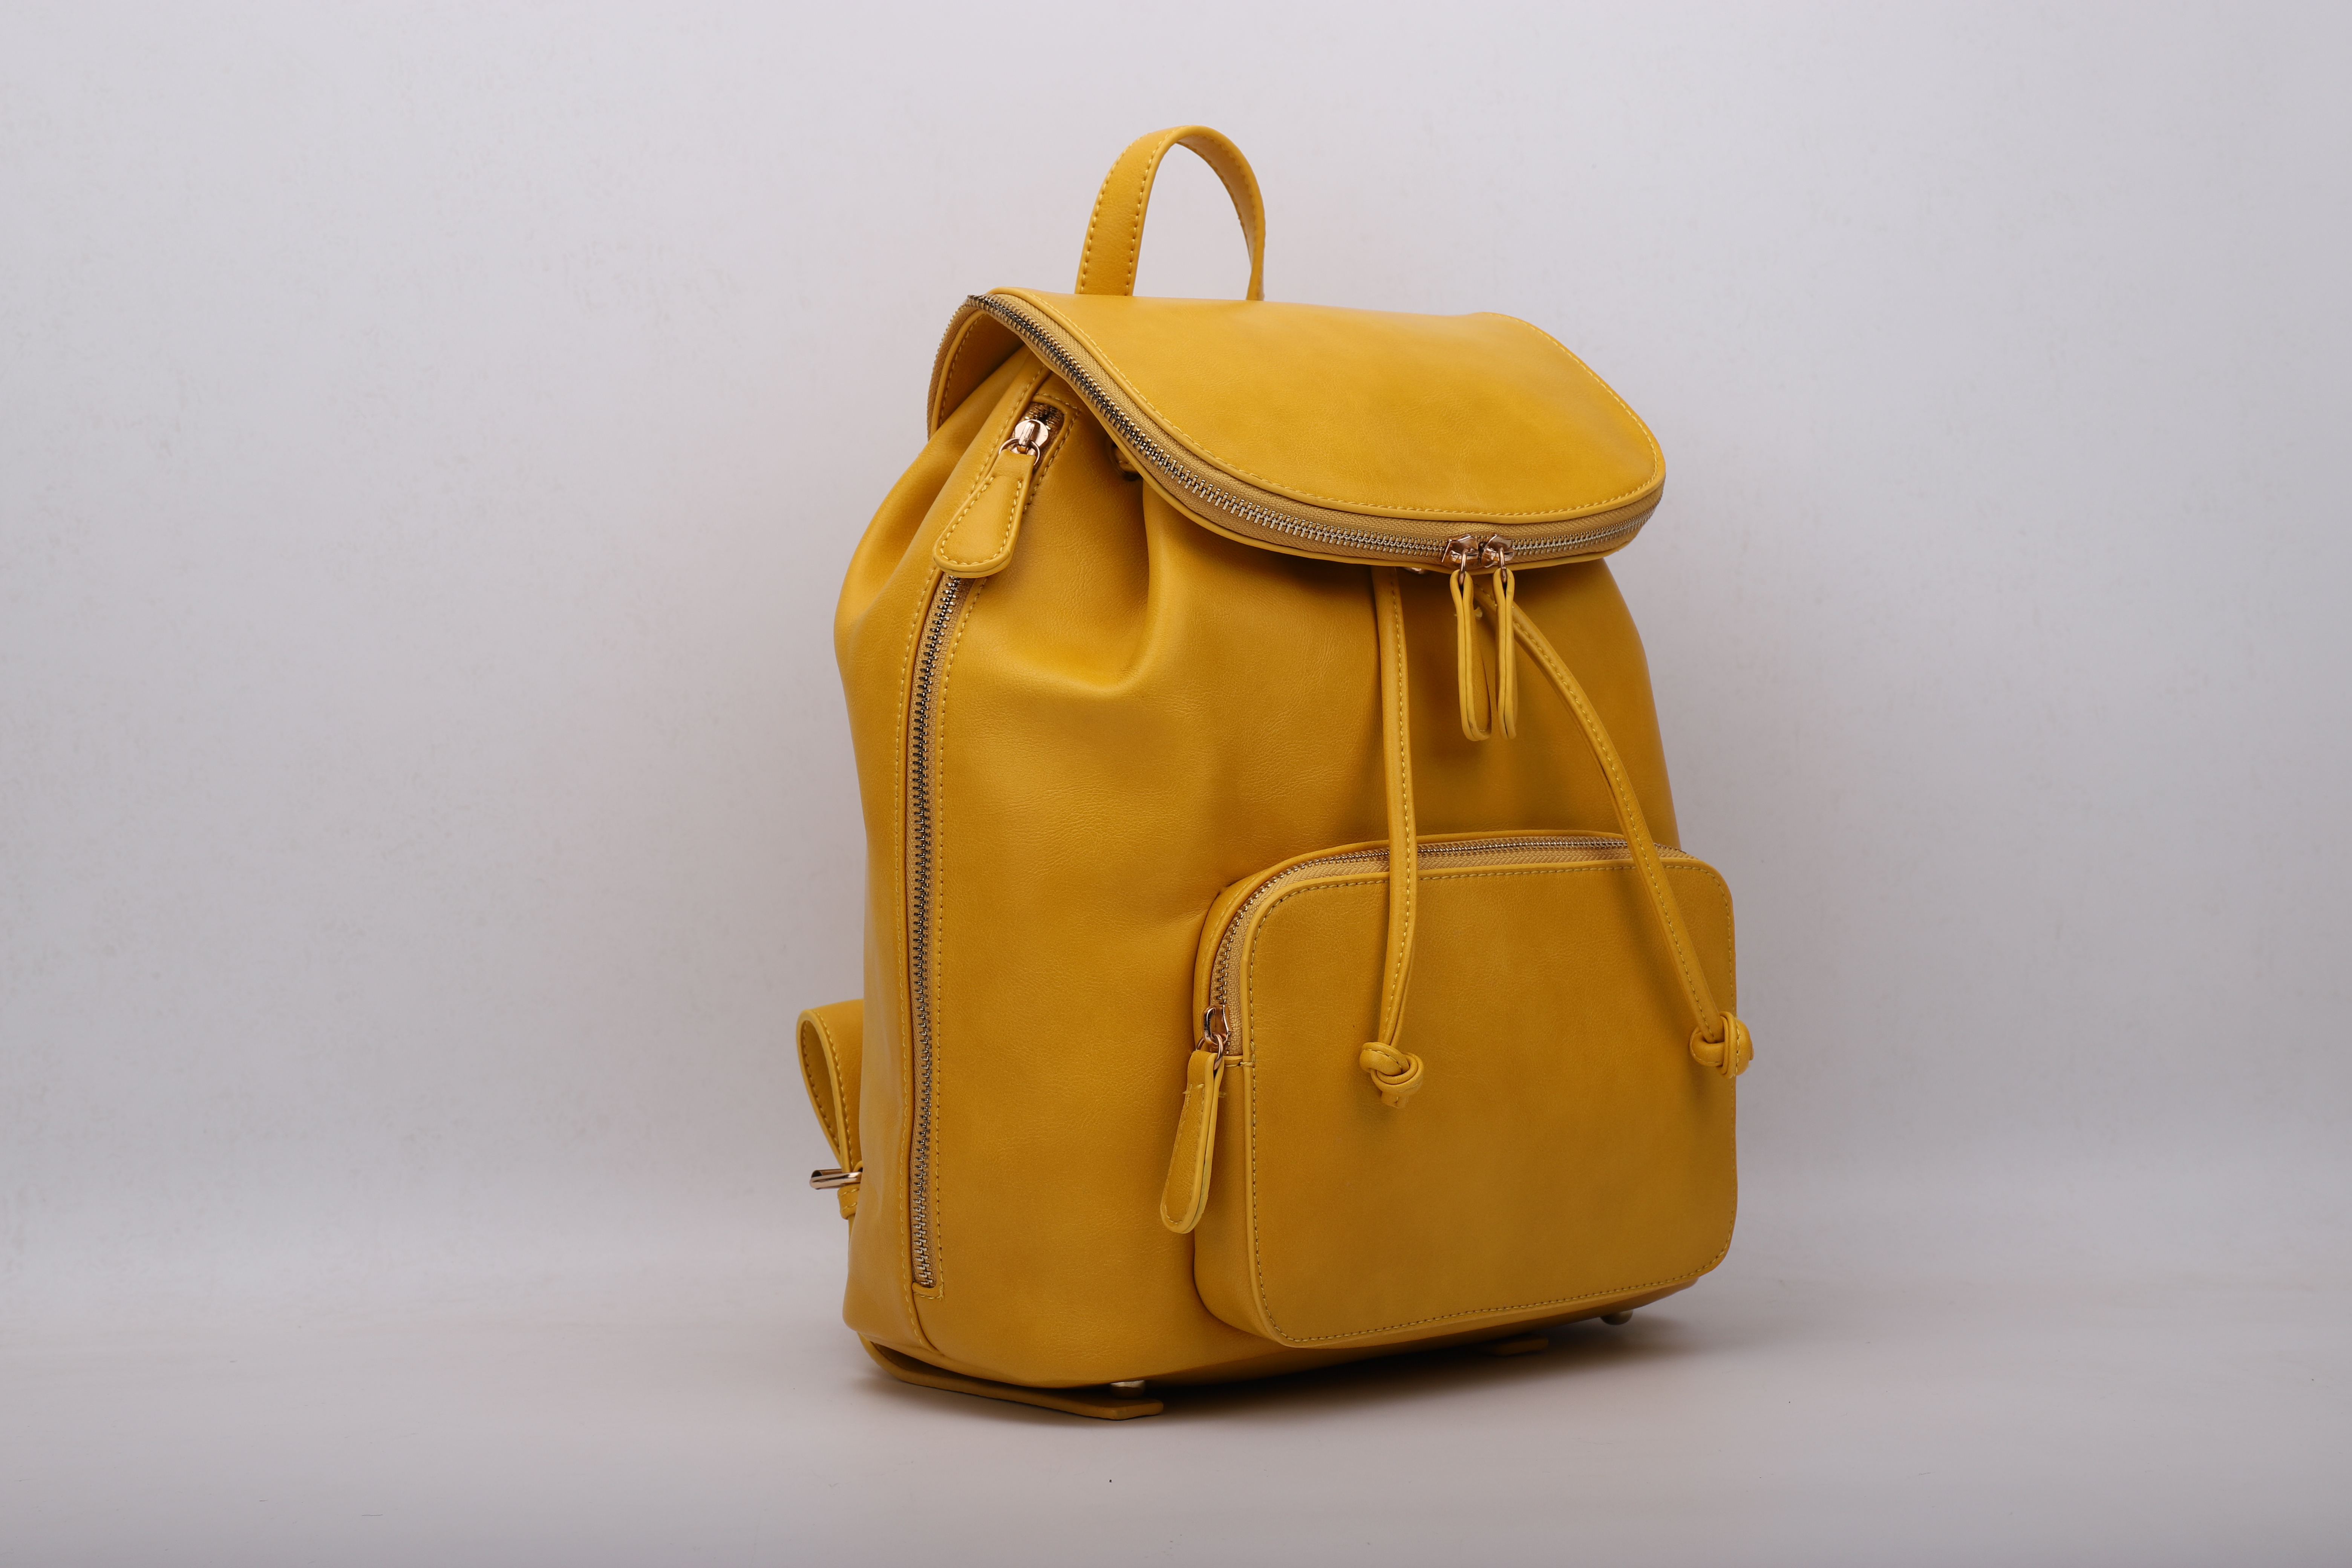 Women PU Backpack with Flap